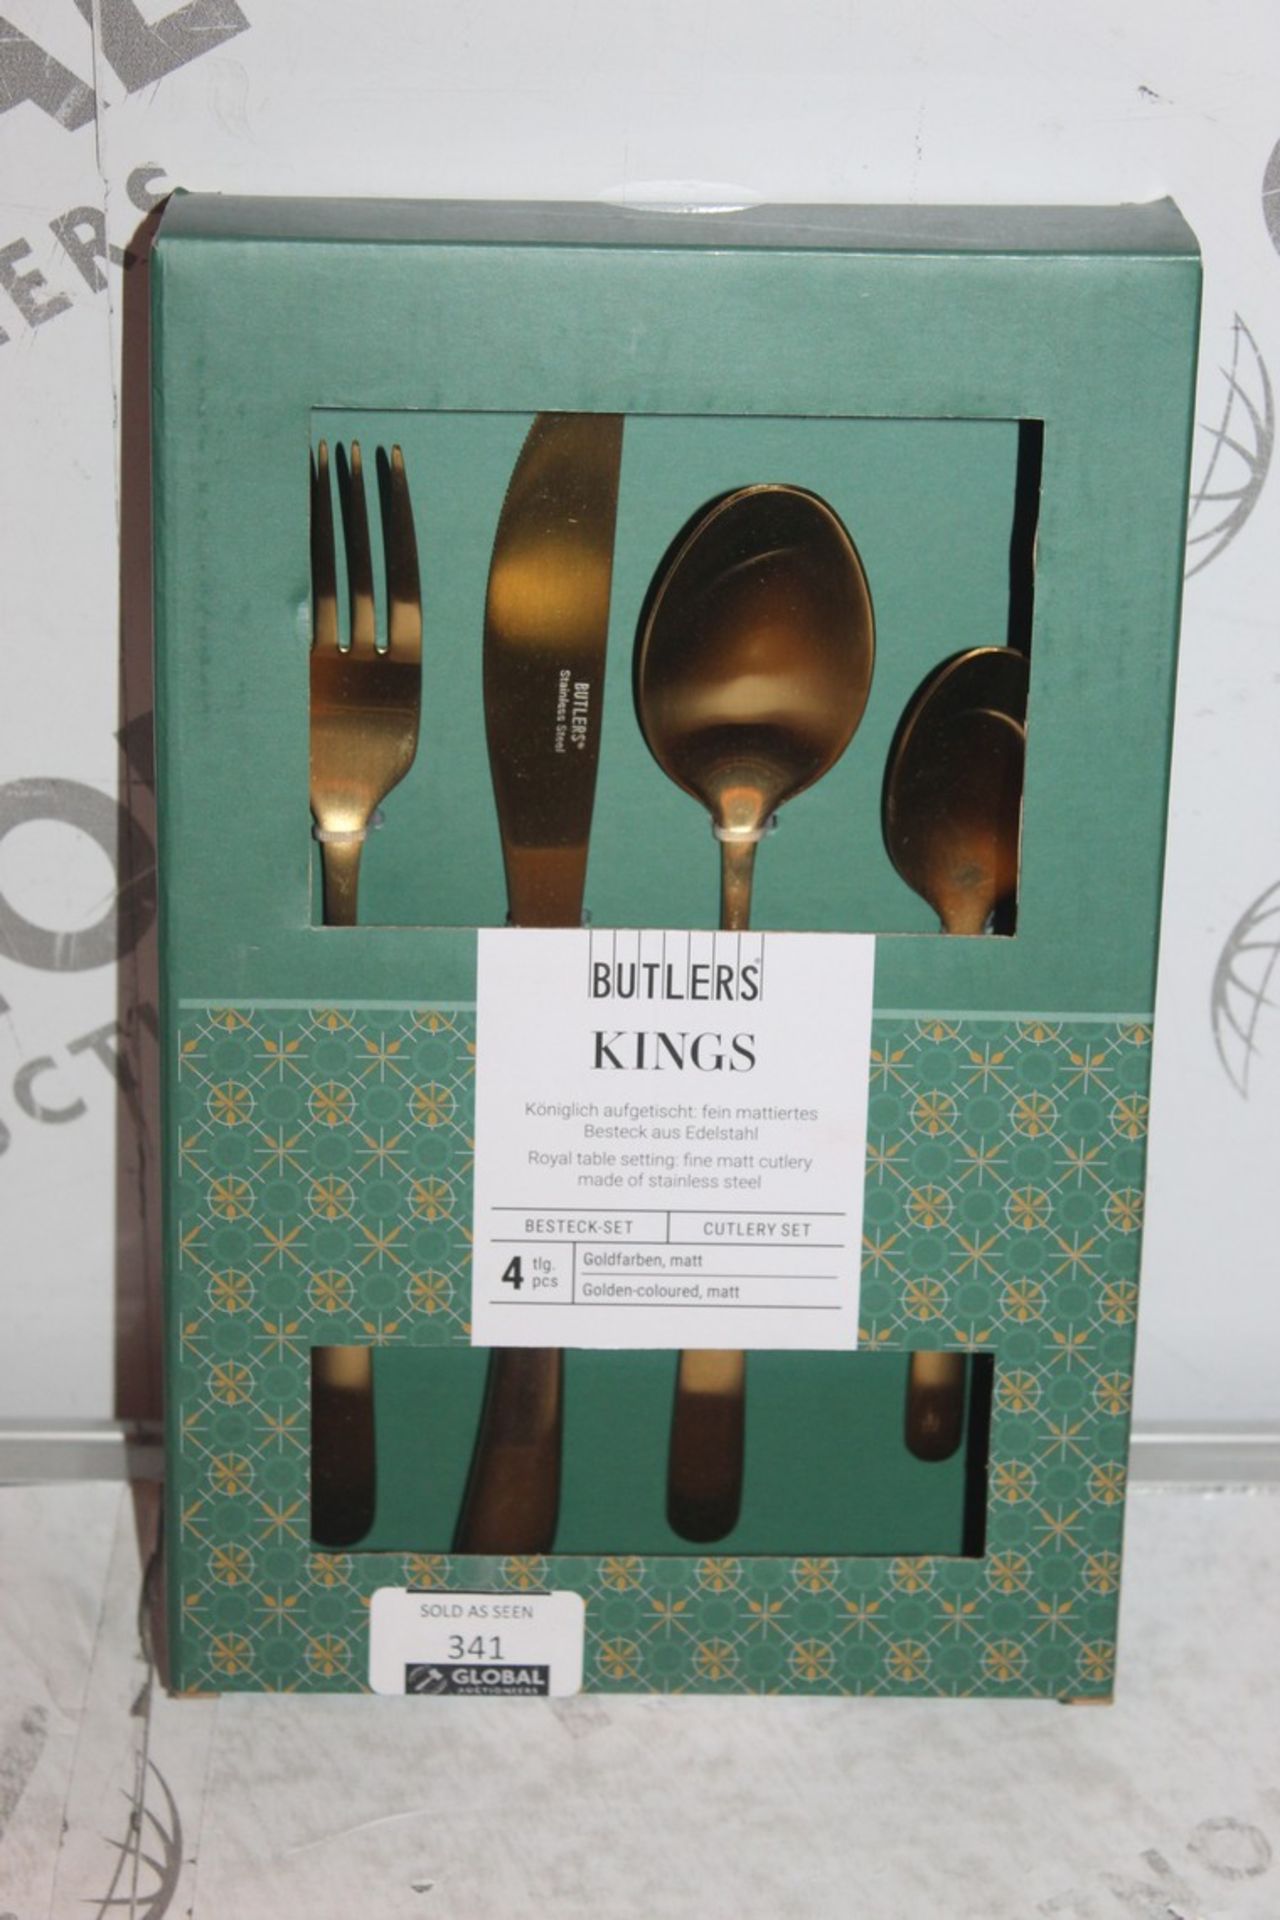 Lot to Contain 2 Butlers Kings 4 Piece Replacement Cutlery Set, Combined RRP£50.00 17003 (Public